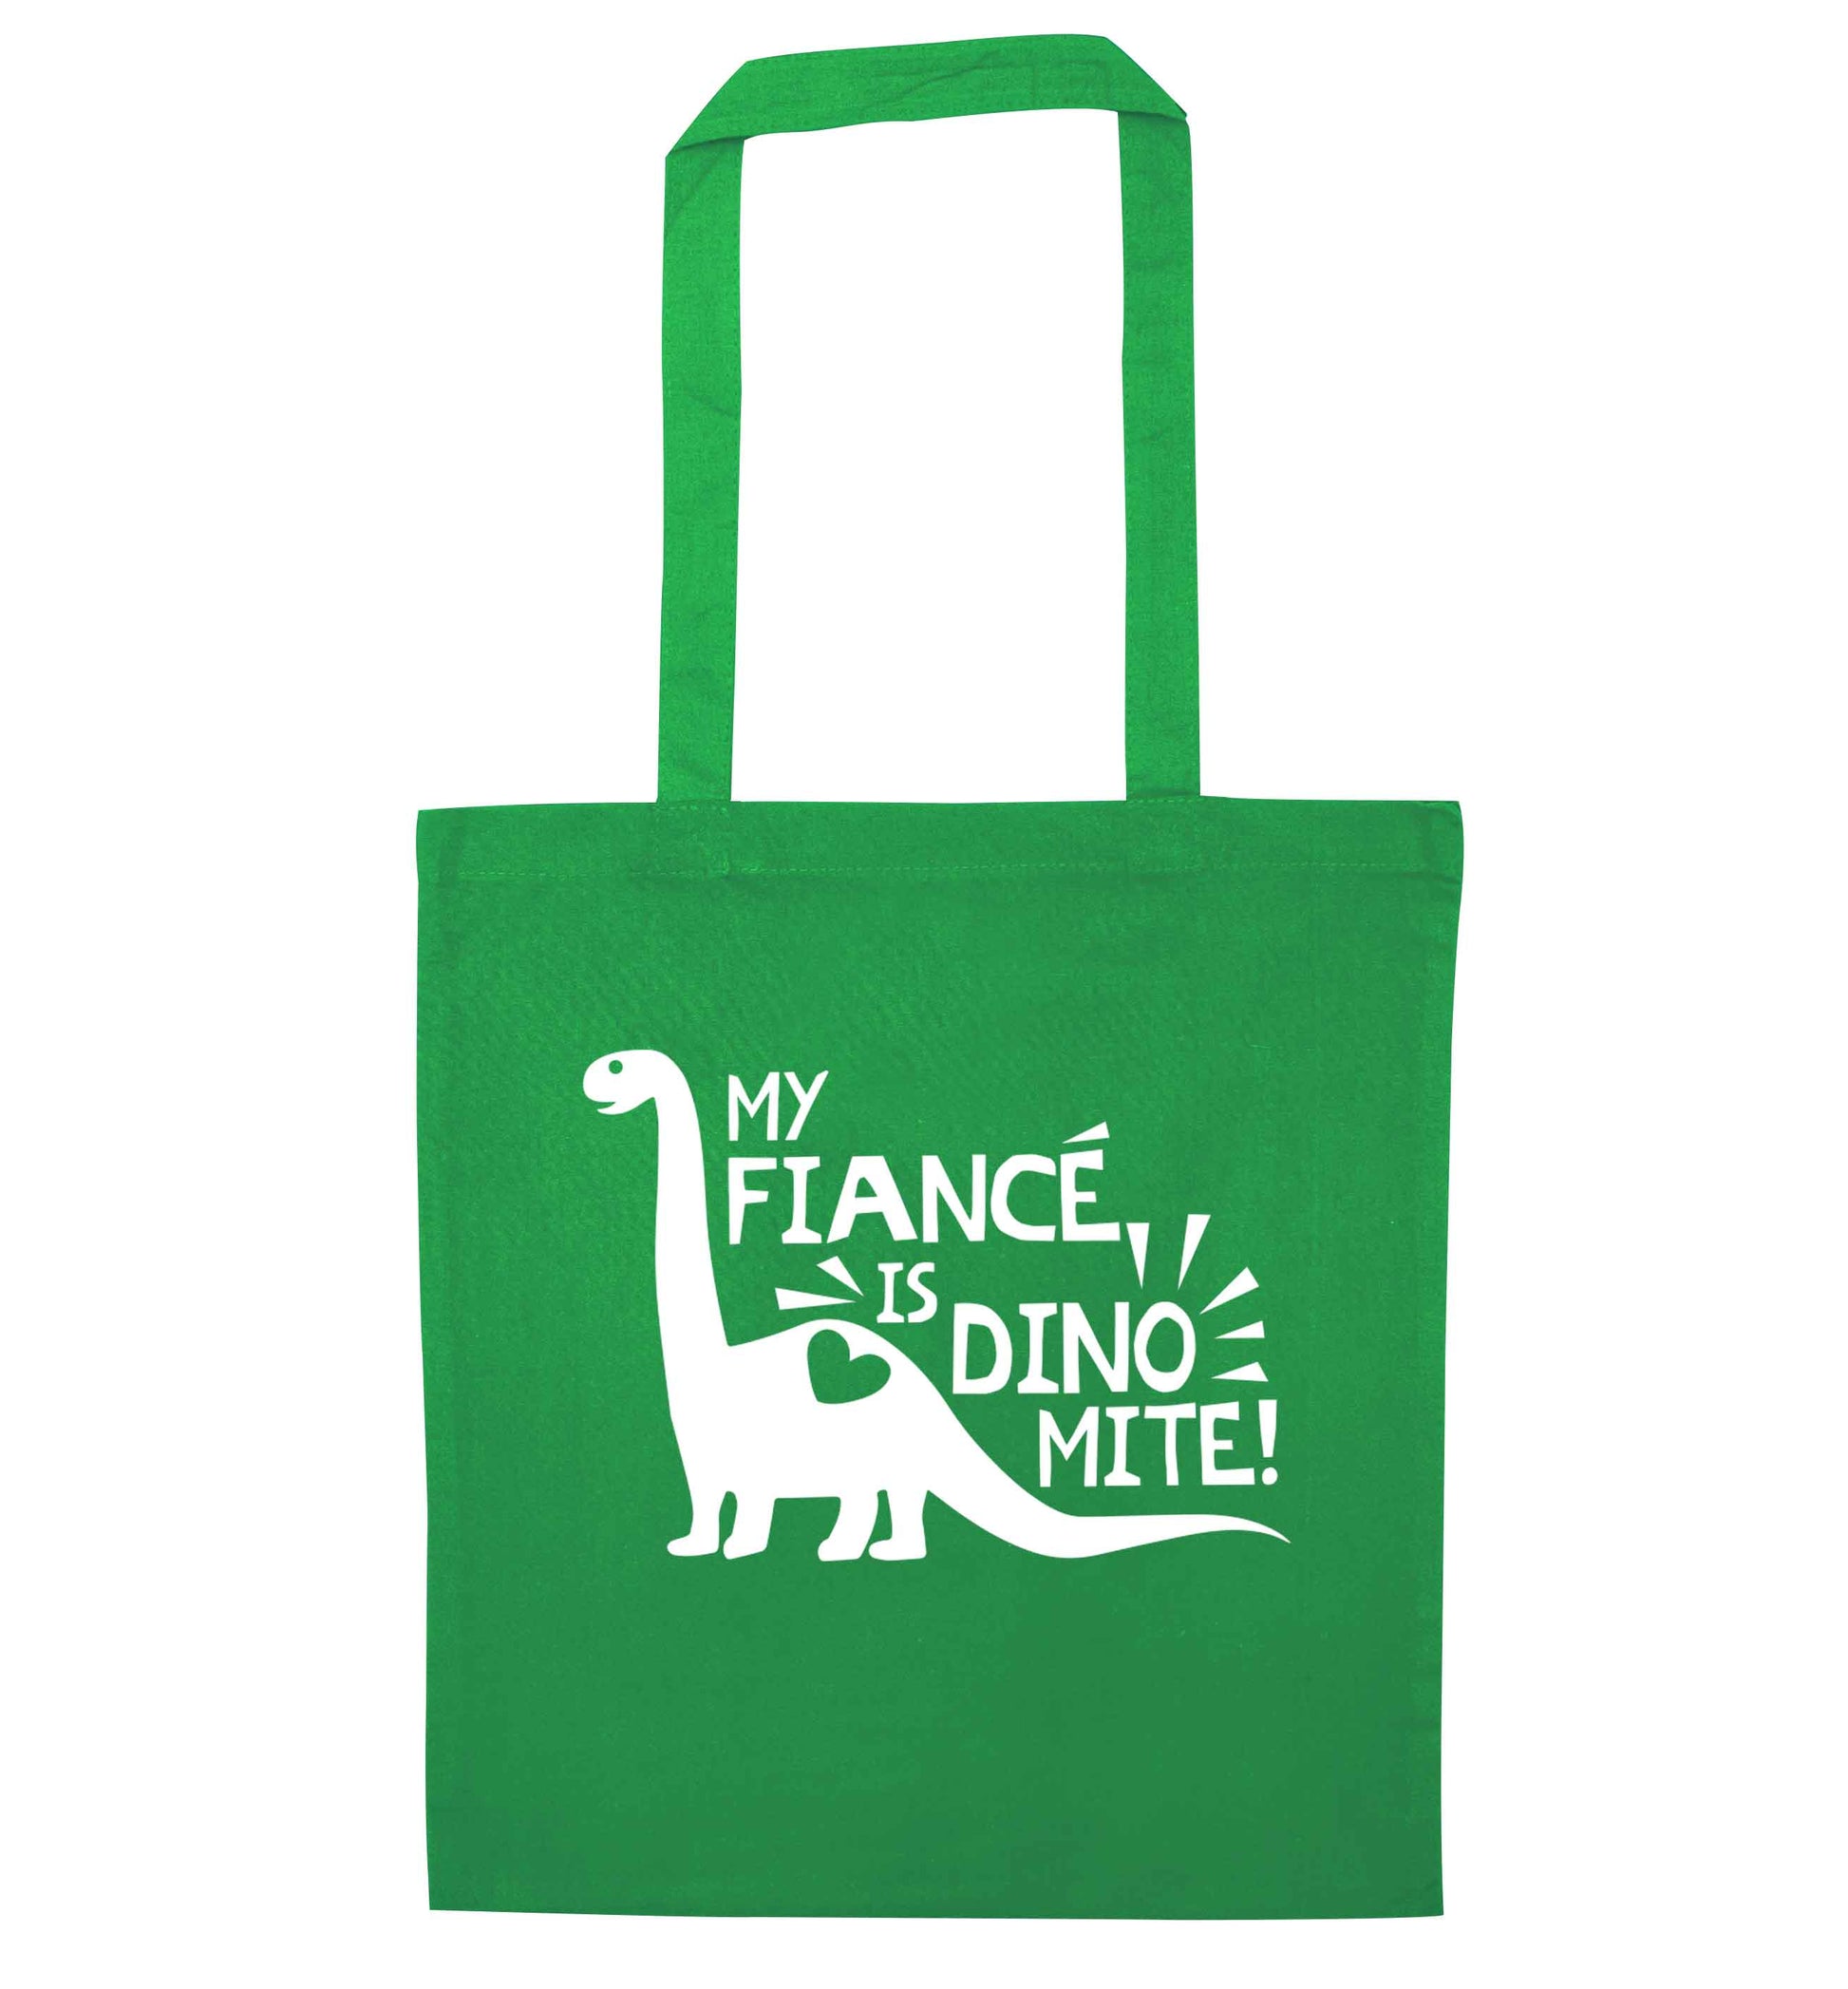 My fiance is dinomite! green tote bag